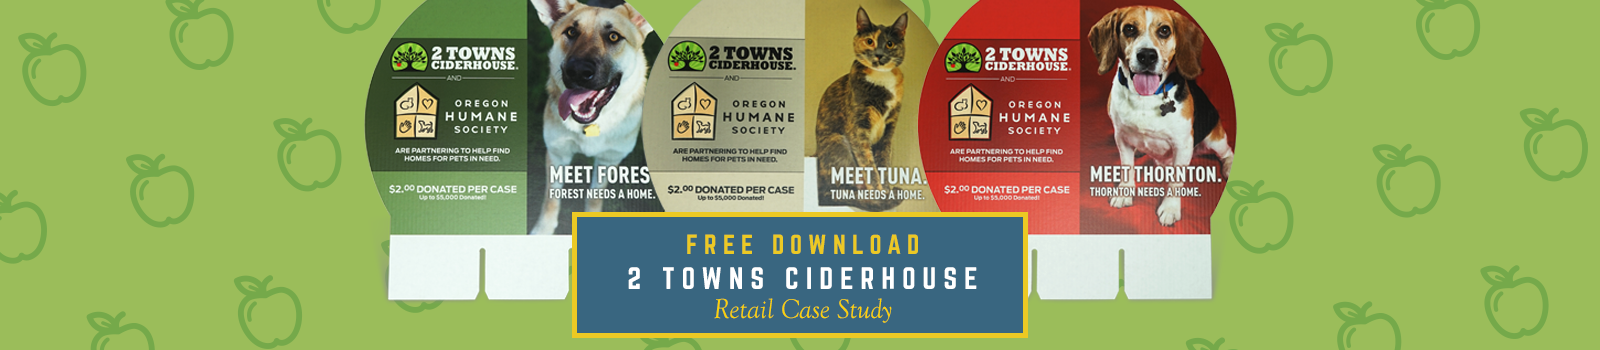 2 Towns Ciderhouse Case Study Free Download